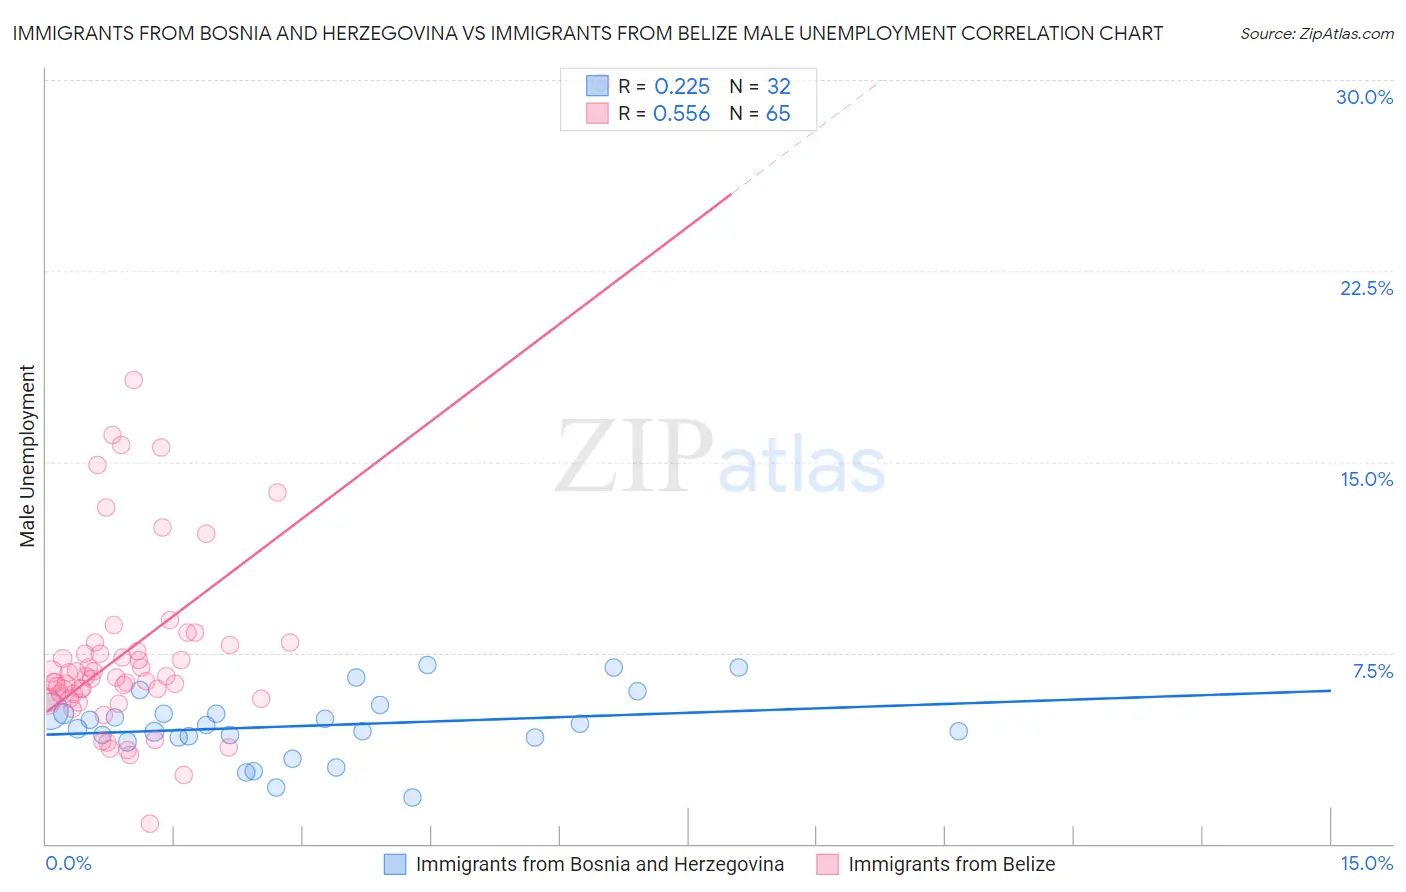 Immigrants from Bosnia and Herzegovina vs Immigrants from Belize Male Unemployment